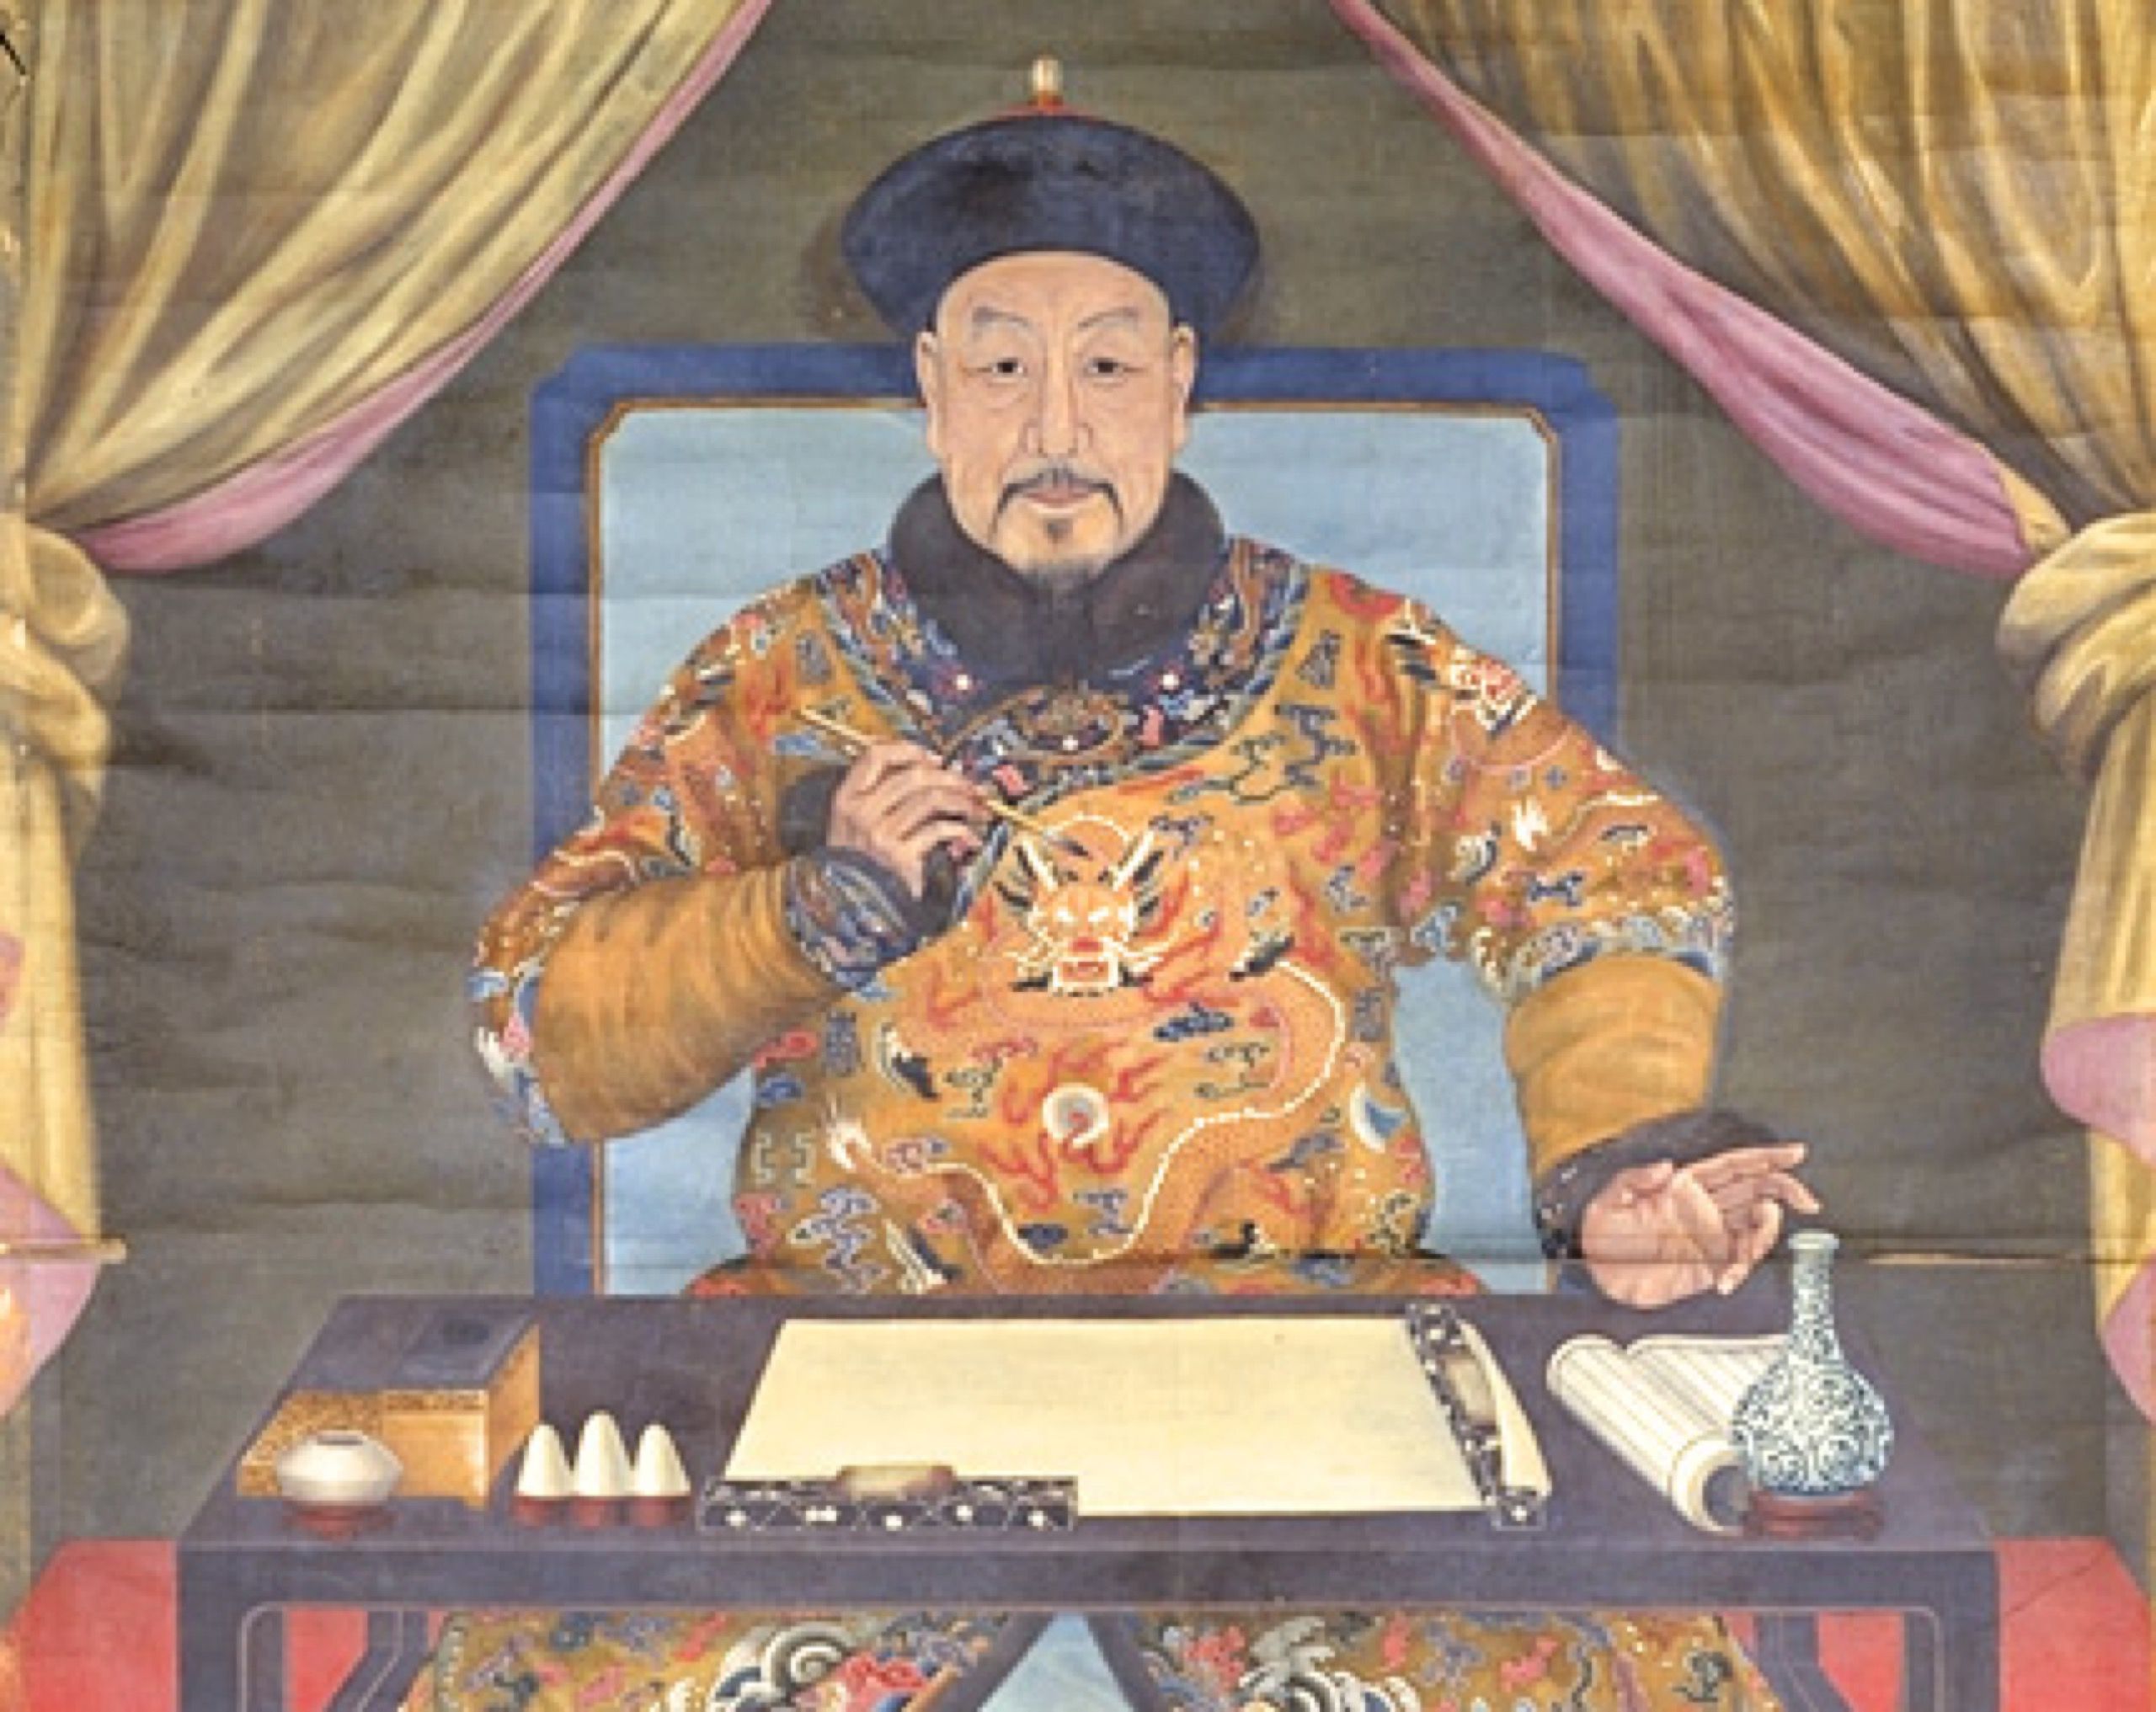 literature in the qing dynasty